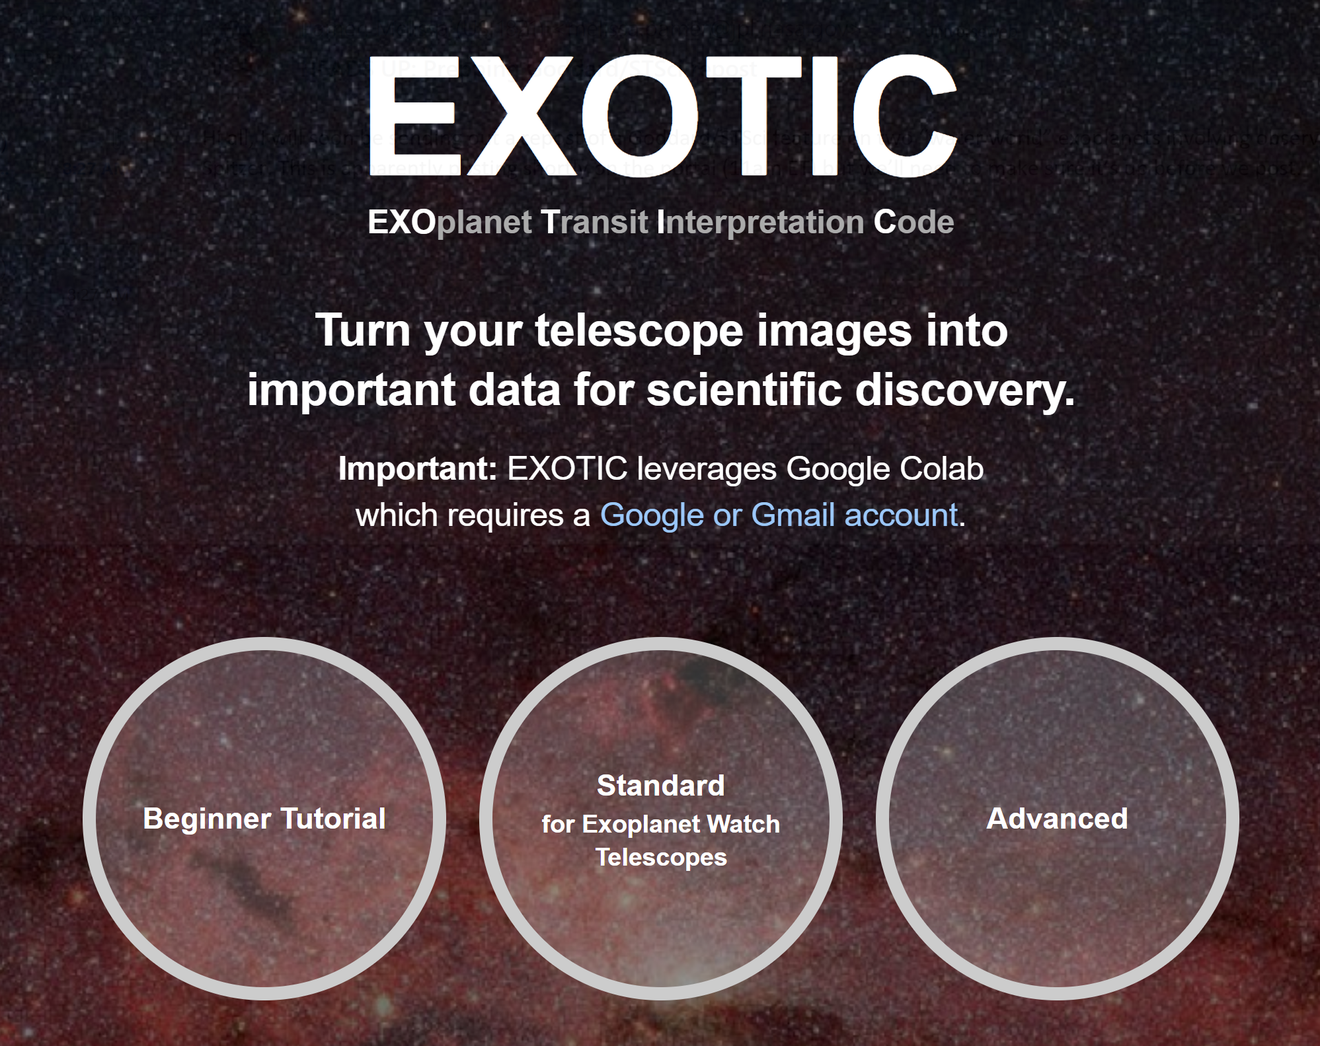 The welcome page for the EXOTIC software program for Exoplanet Watch. Convert images into important data for scientific discovery. Use of EXOTIC requires a Google or Gmail account. Links are provided for the basic tutorial.